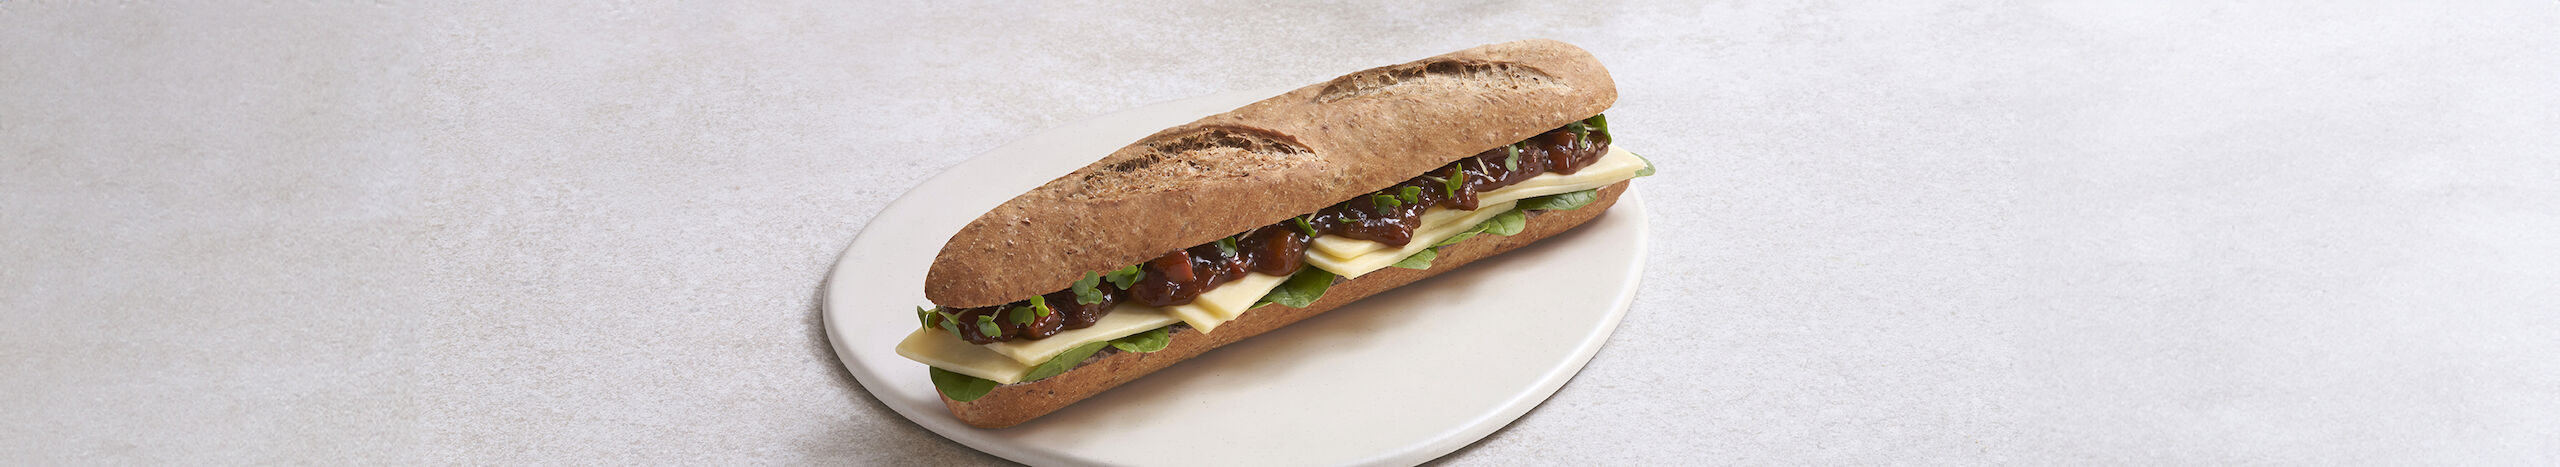 Thaw & Serve Malted Wheat Small Baguette_RT_LR 1